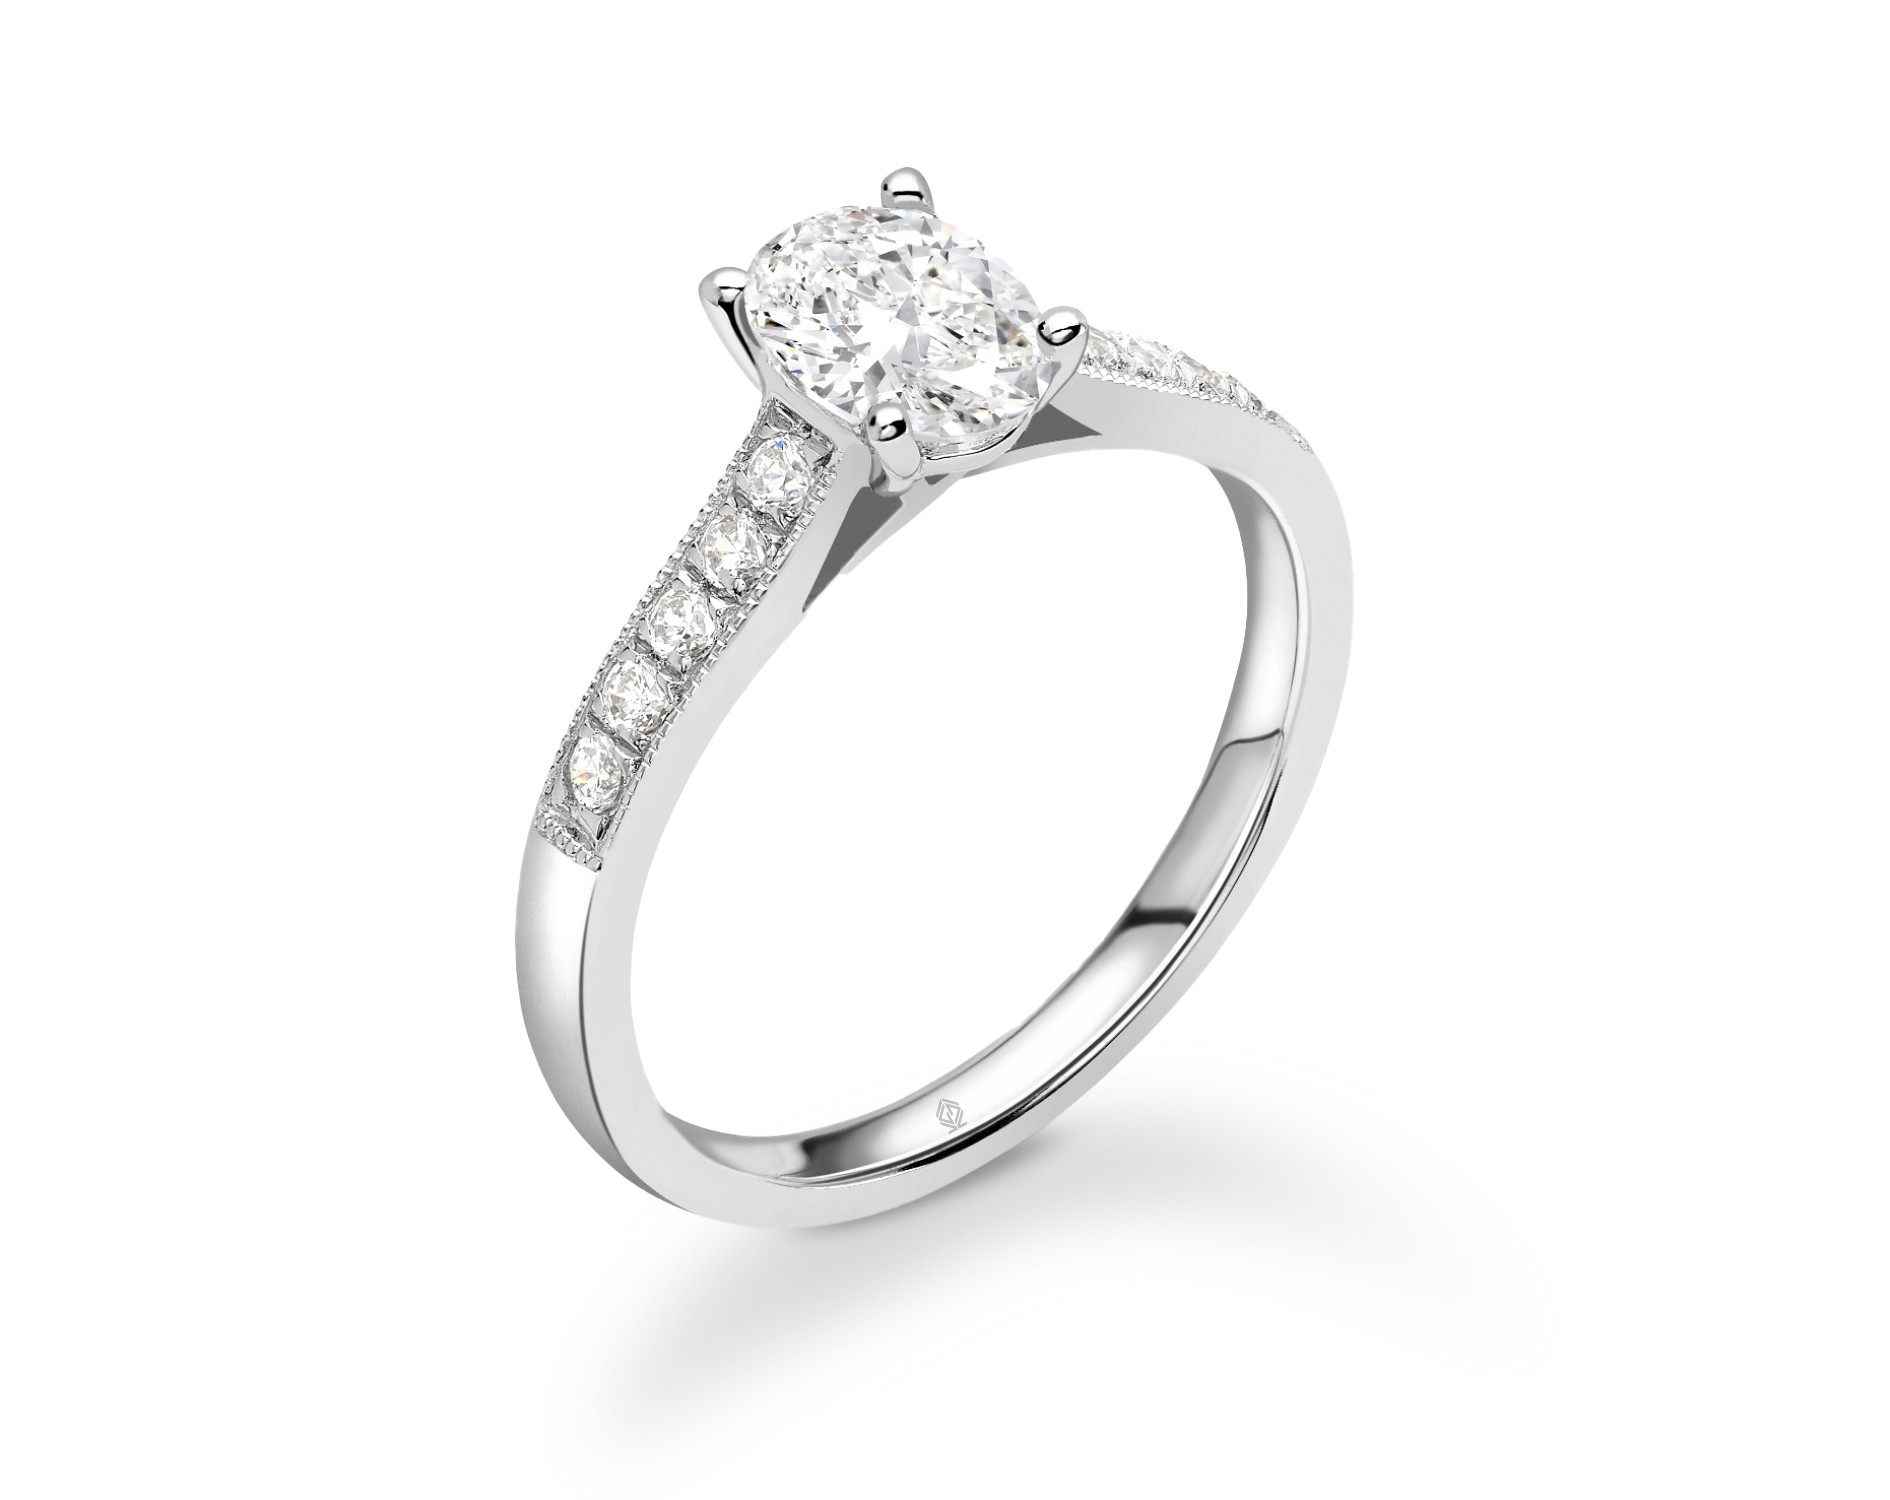 18K WHITE GOLD OVAL CUT DIAMOND ENGAGEMENT RING WITH SIDE STONES MILGRAIN CHANNEL SET